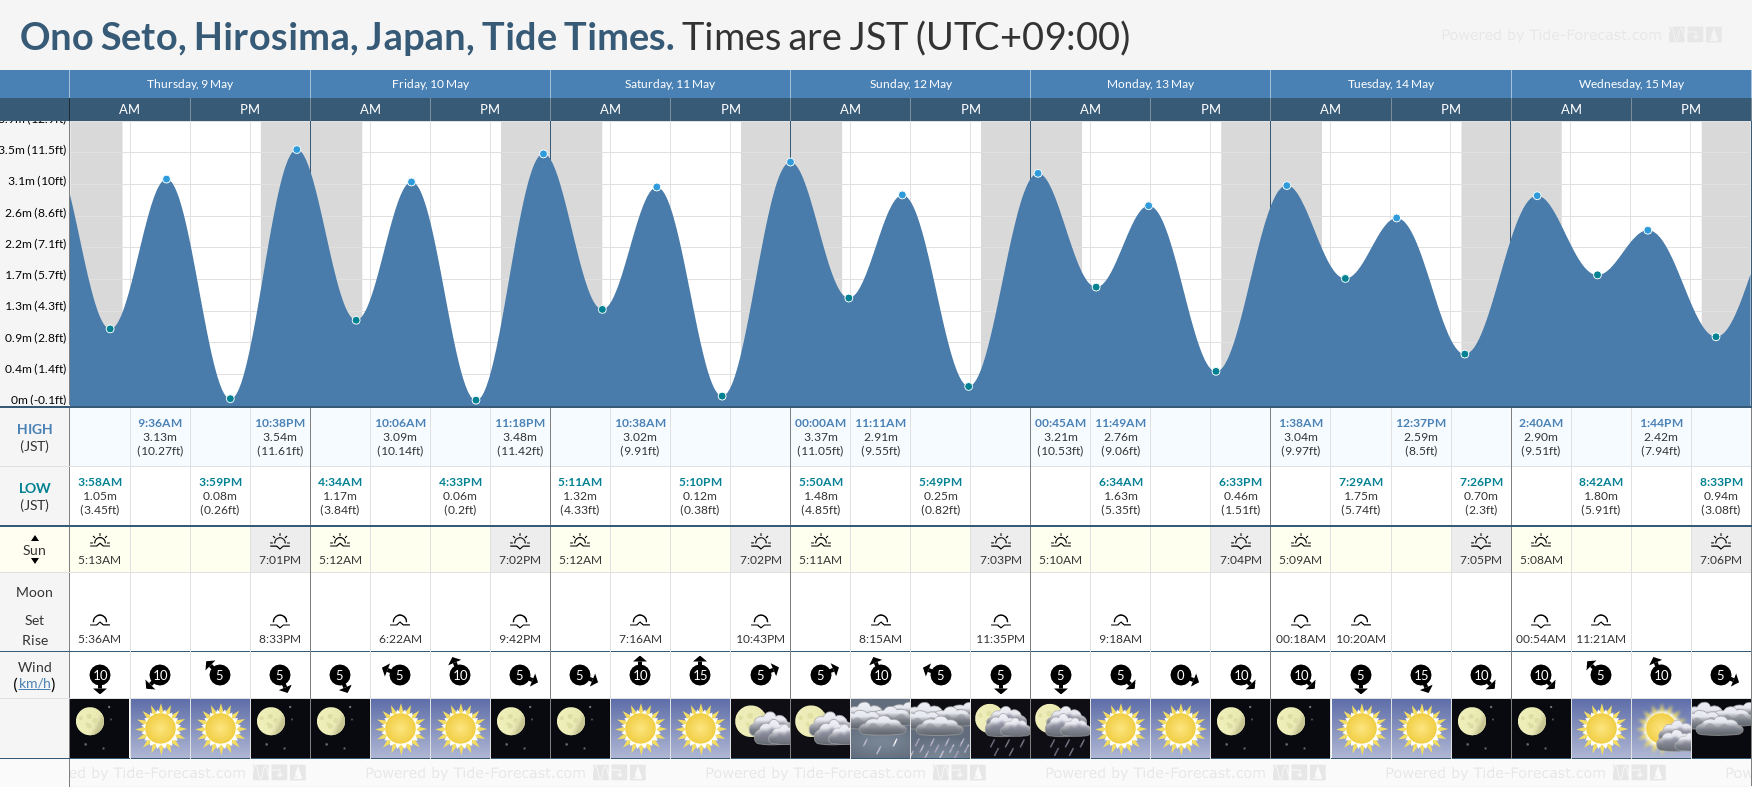 Ono Seto, Hirosima, Japan Tide Chart including high and low tide tide times for the next 7 days